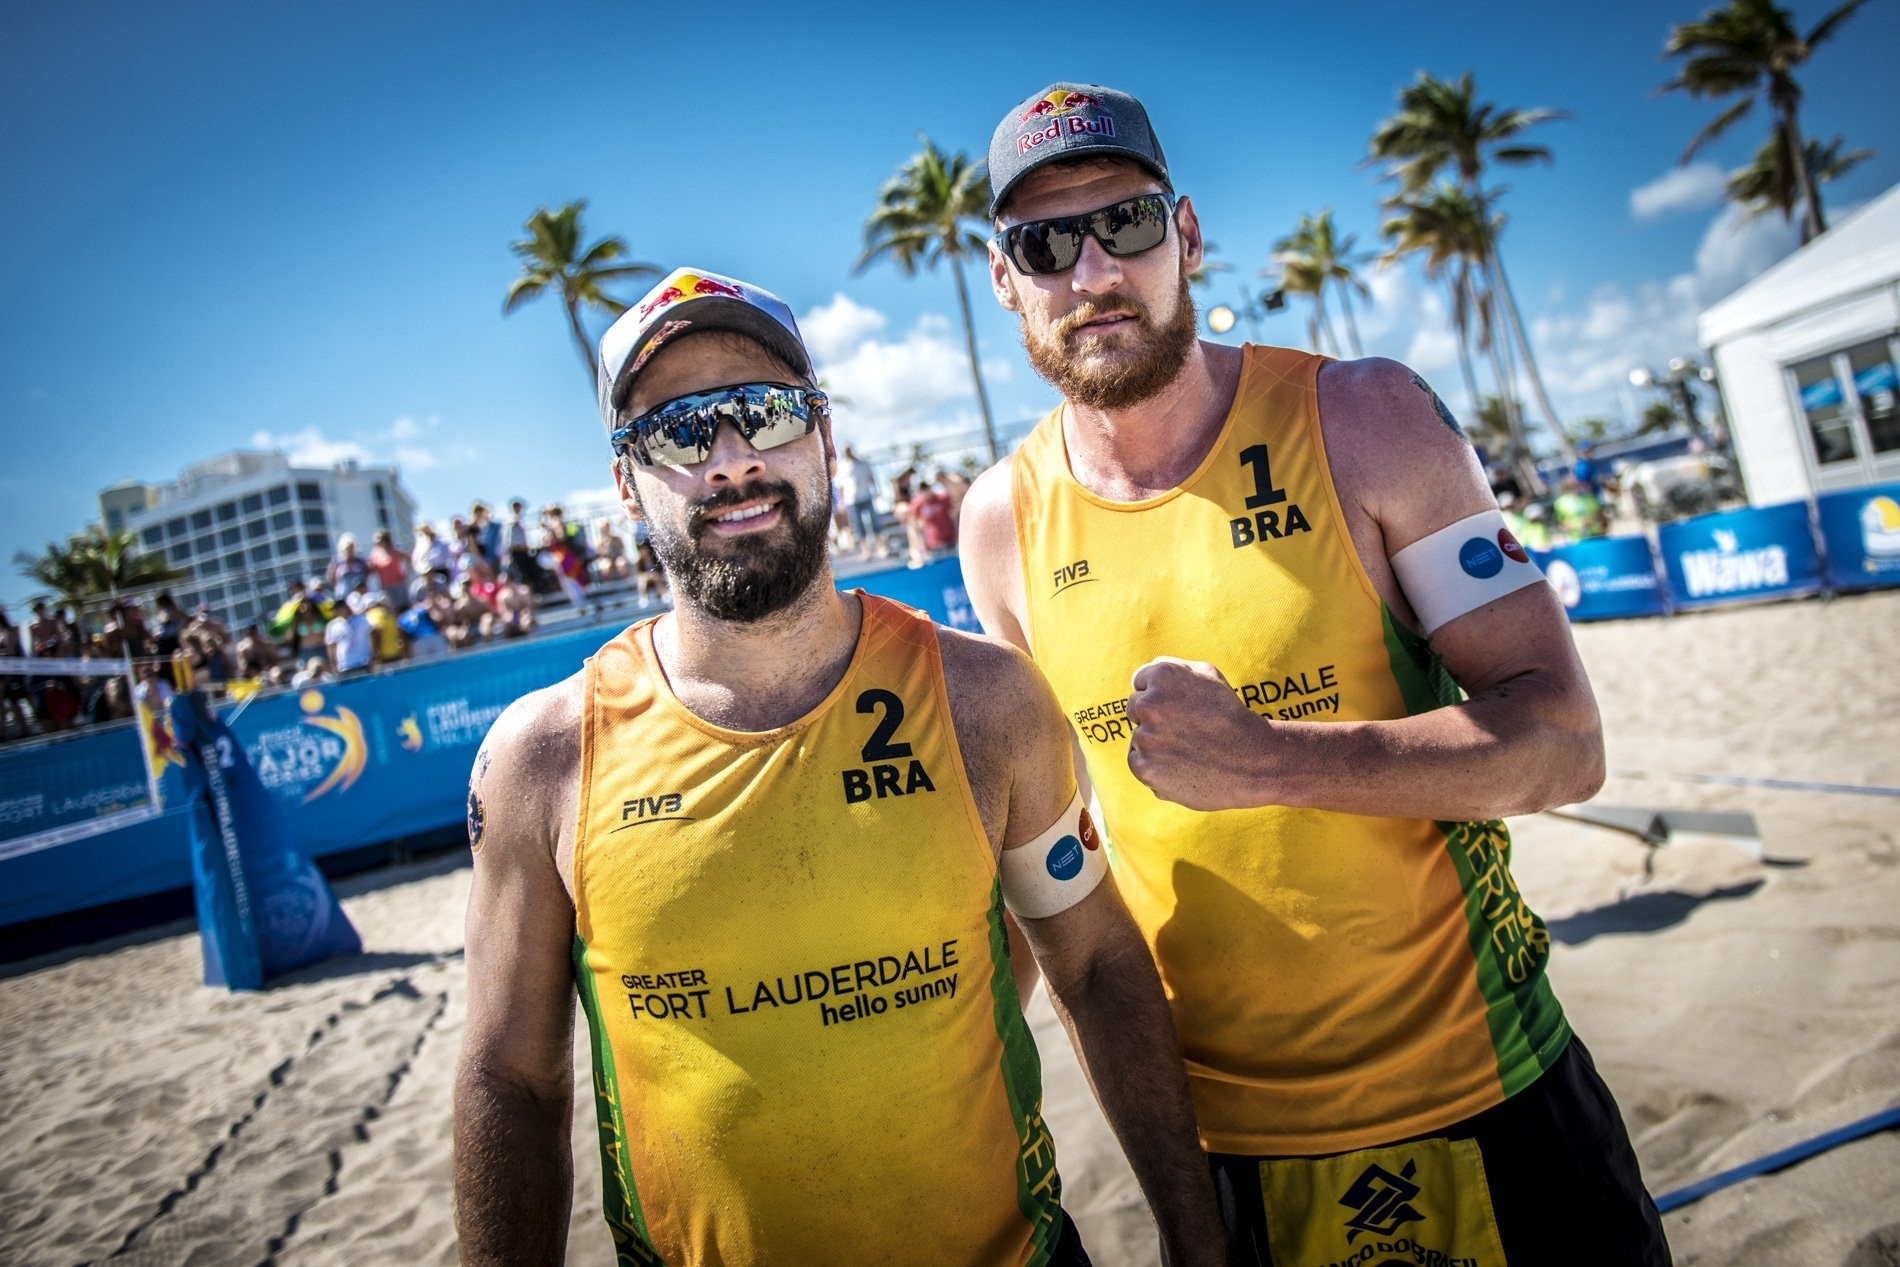 Olympic champions ease through at FIVB Beach Volleyball World Tour